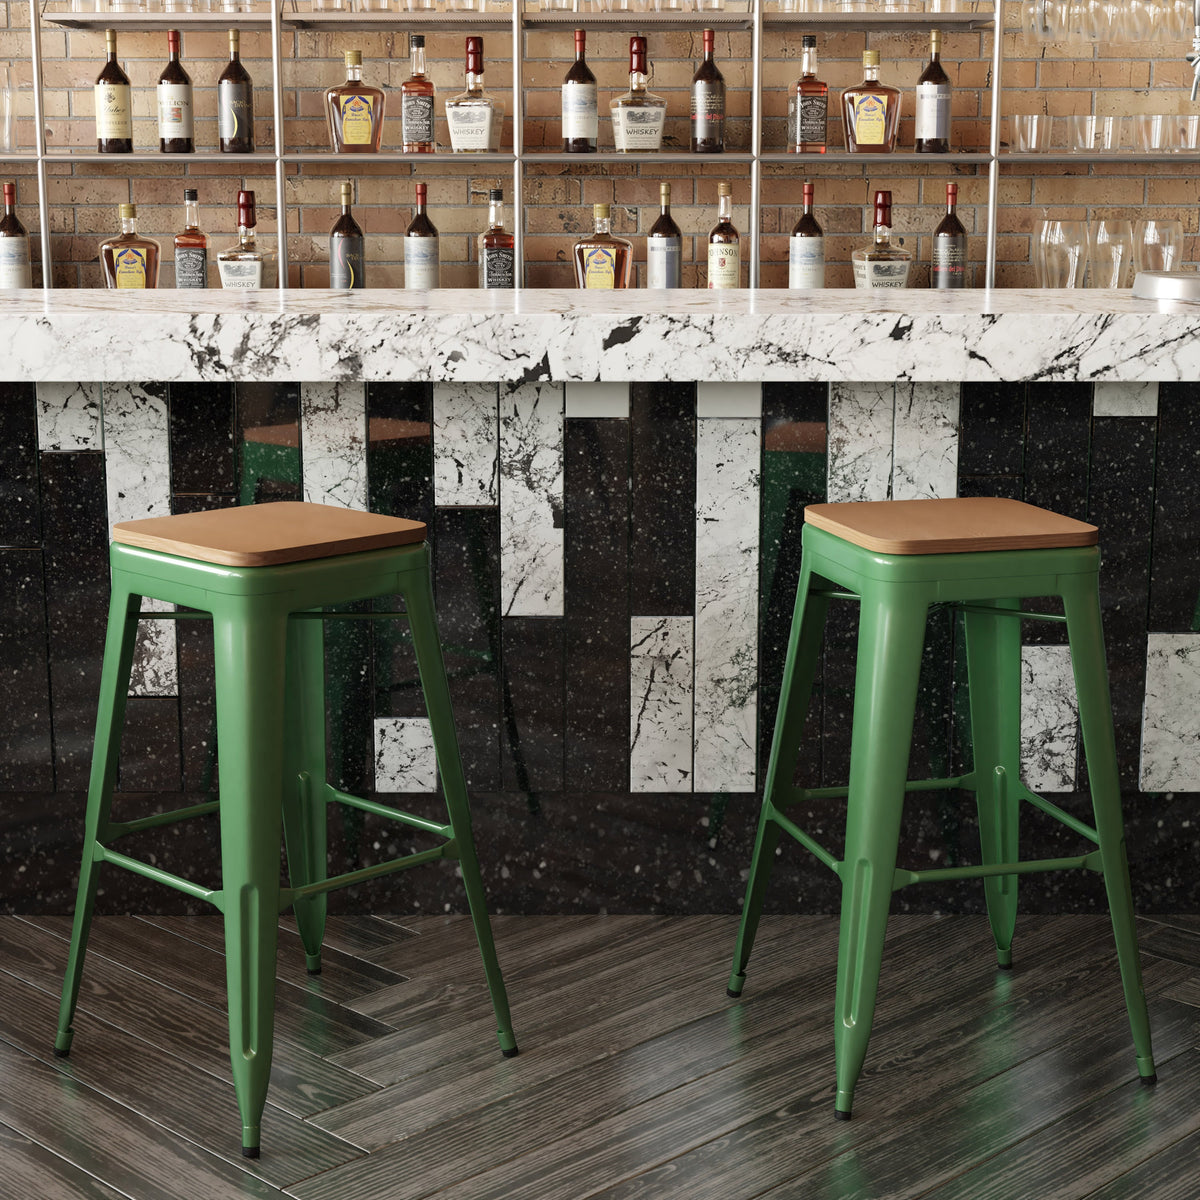 Green/Teak |#| Indoor/Outdoor Backless Bar Stool with Poly Seat - Green/Teak